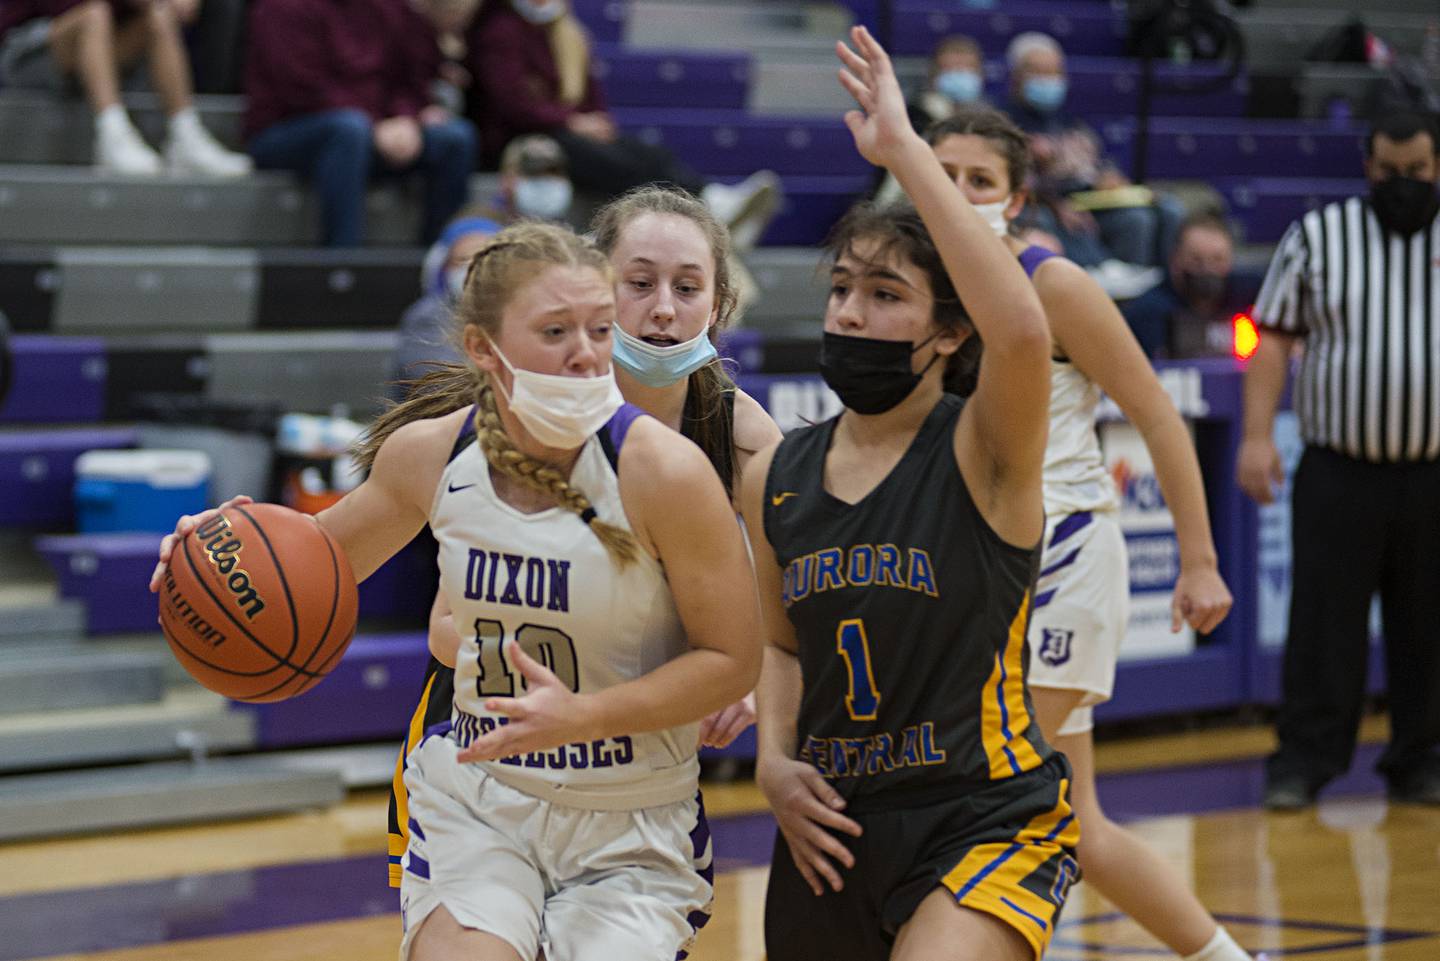 Dixon's Sam Tourtillot drives to the hoop against Aurora Central Monday, Dec. 27, 2021 at the KSB Dixon girls holiday basketball tournament.